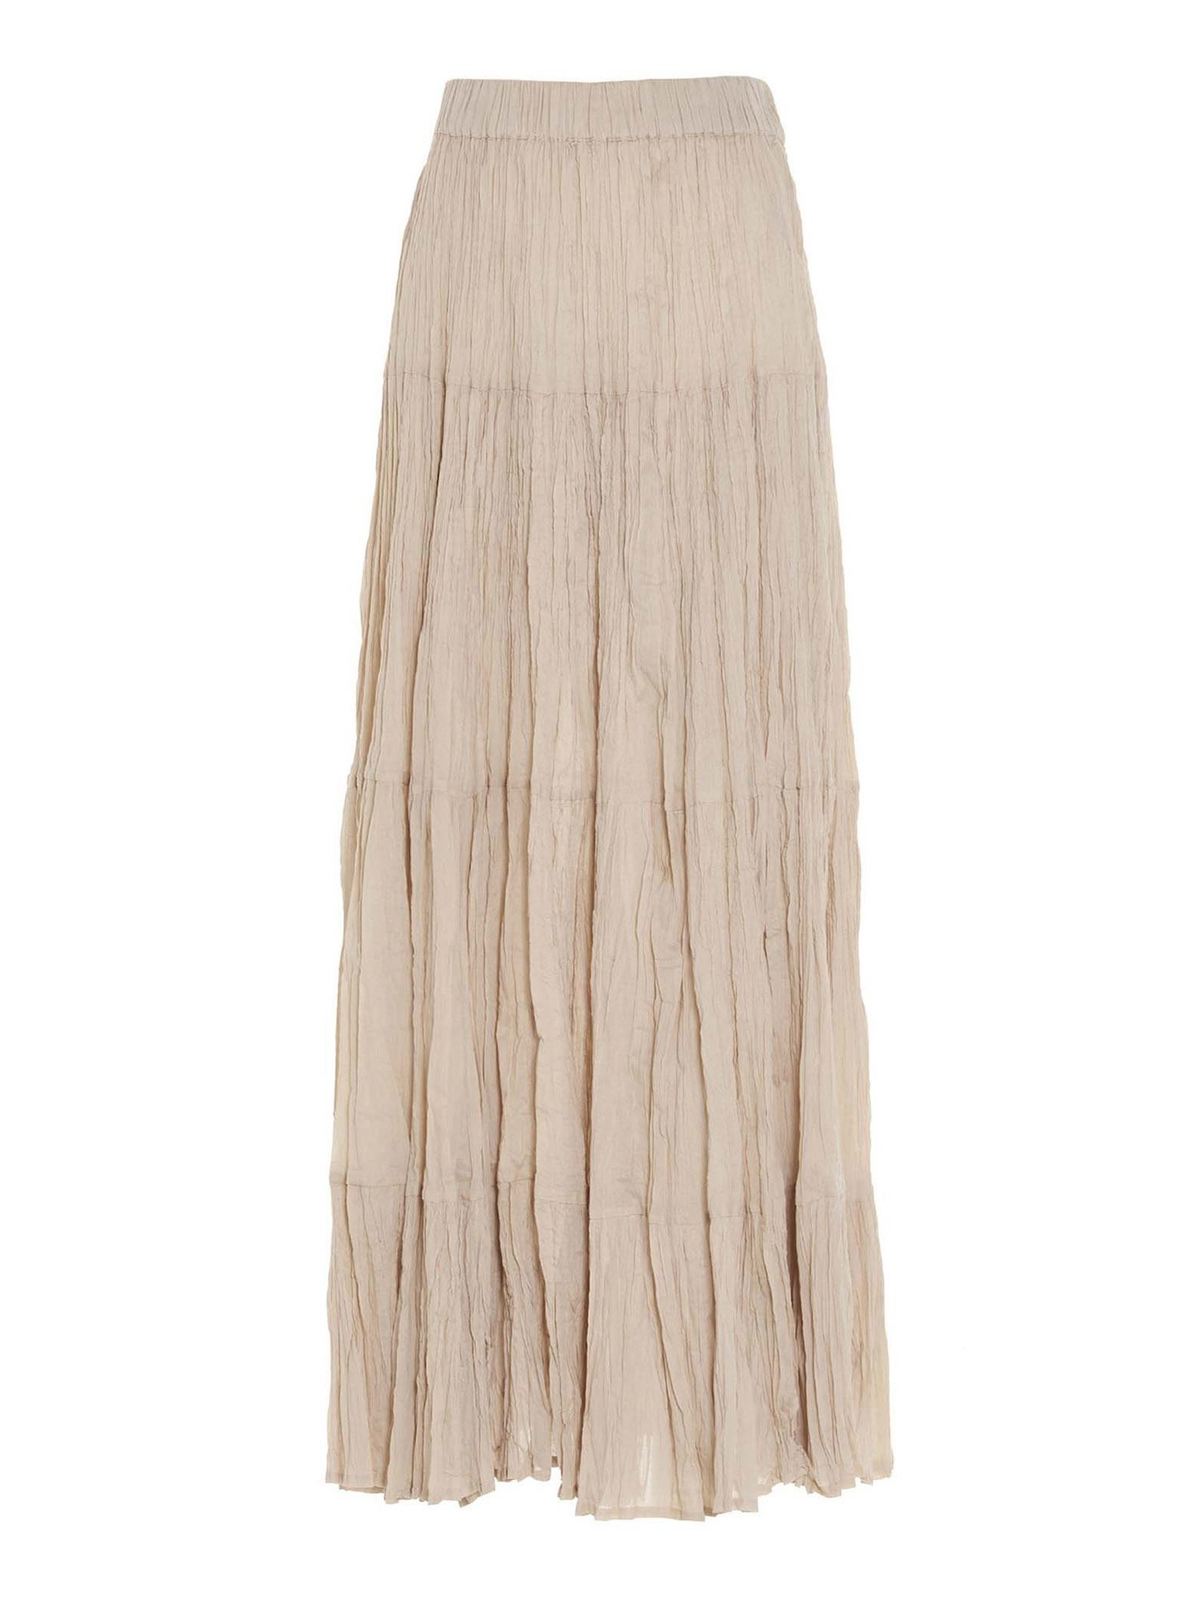 P.A.R.O.S.H CREASED EFFECT SKIRT IN BEIGE